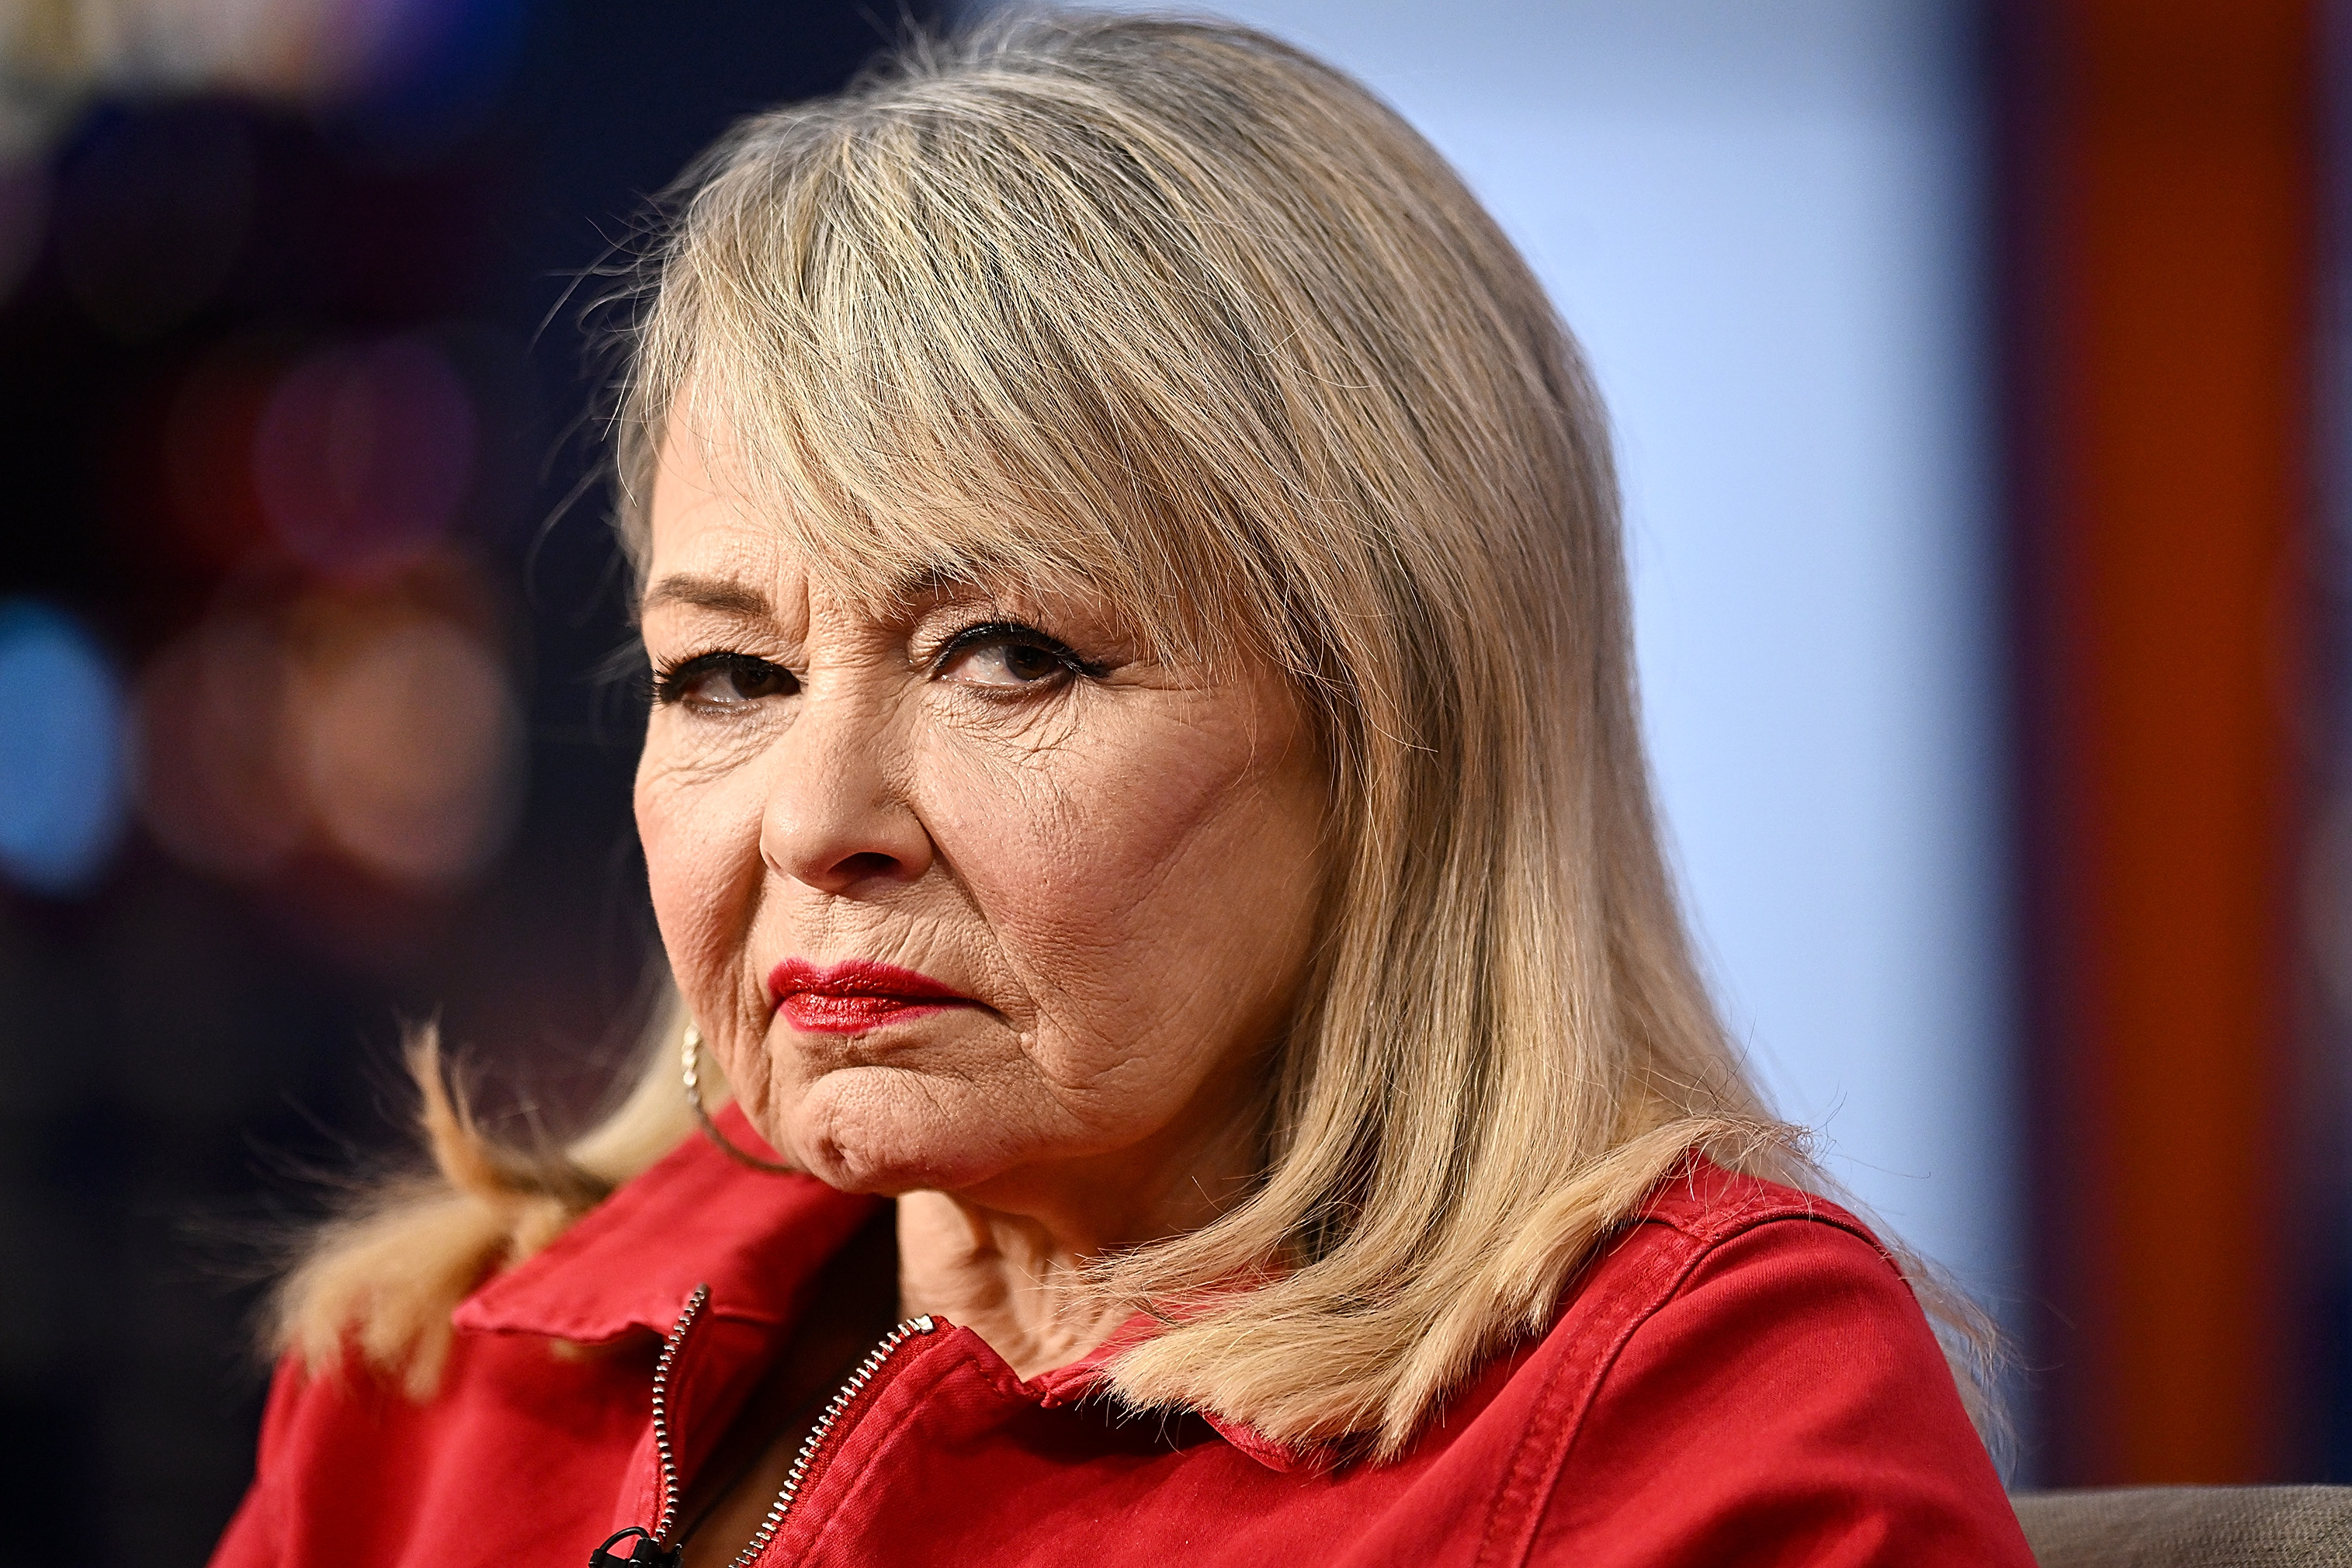 Roseanne Barr visits Fox News Channel’s "Gutfeld!" on February 14, 2023, in New York City | Source: Getty Images